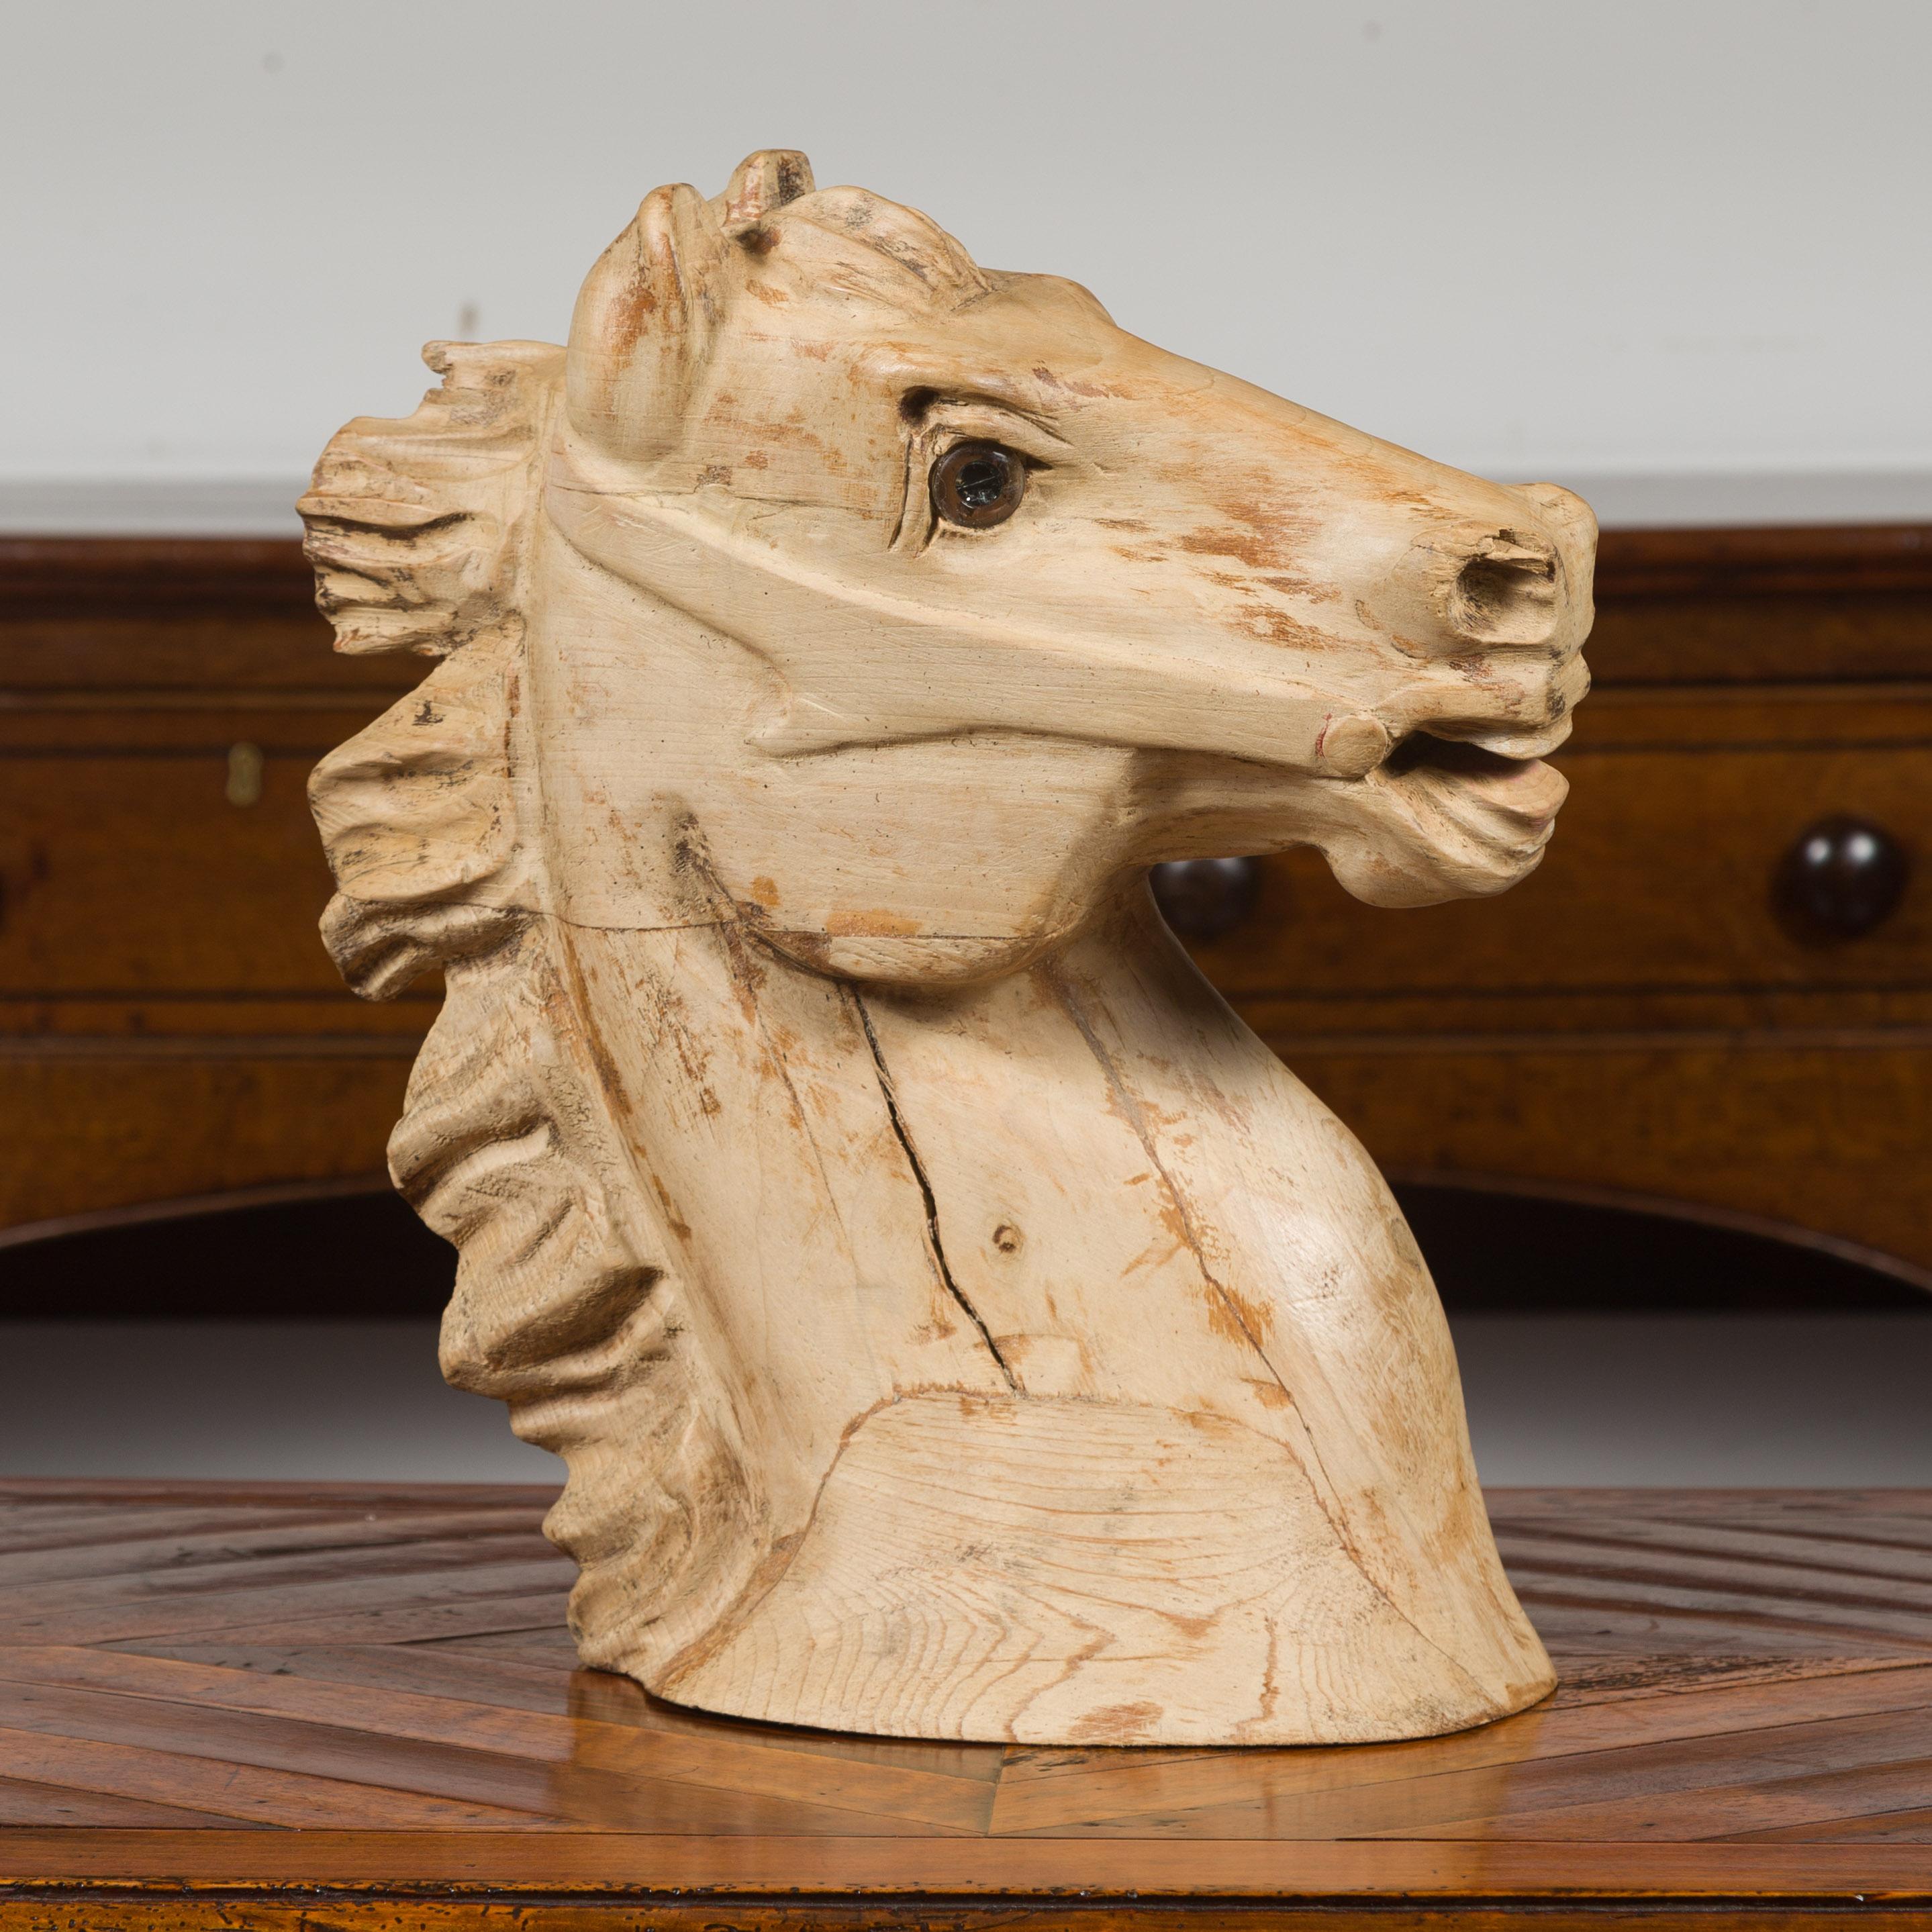 An American carved wooden horse head fragment from the mid-20th century, with nicely weathered patina. Made in America during the second quarter of the 20th century, this carved wooden head captures our attention with its expressive features and